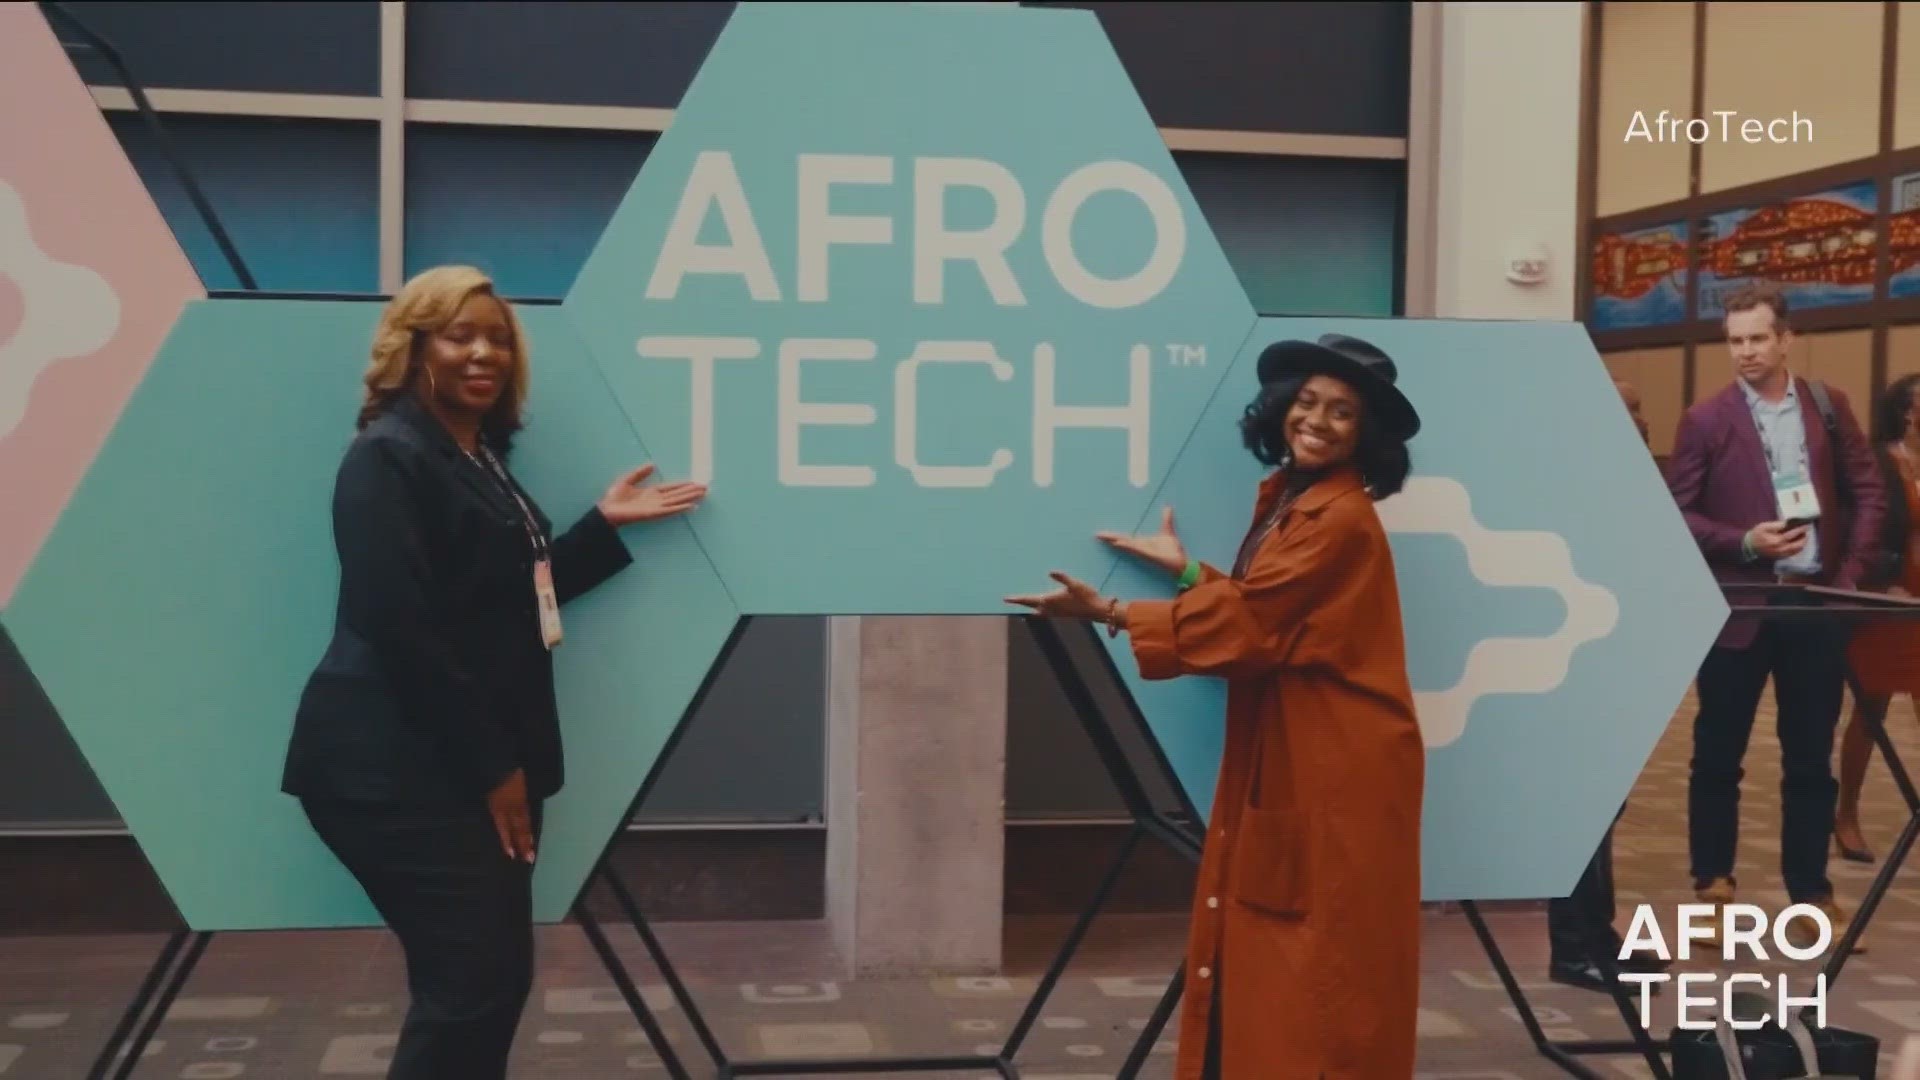 AfroTech focuses on recruiting, innovating and filling the gap between tech companies and Black professionals. The event brought millions of dollars to Austin.